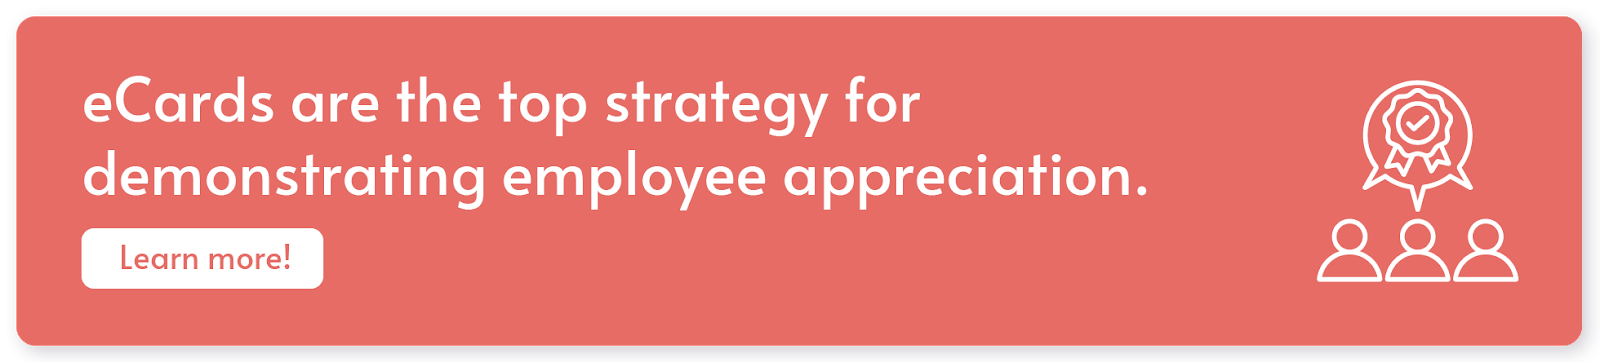 eCards are the top strategy for demonstrating employee appreciation. Learn more!